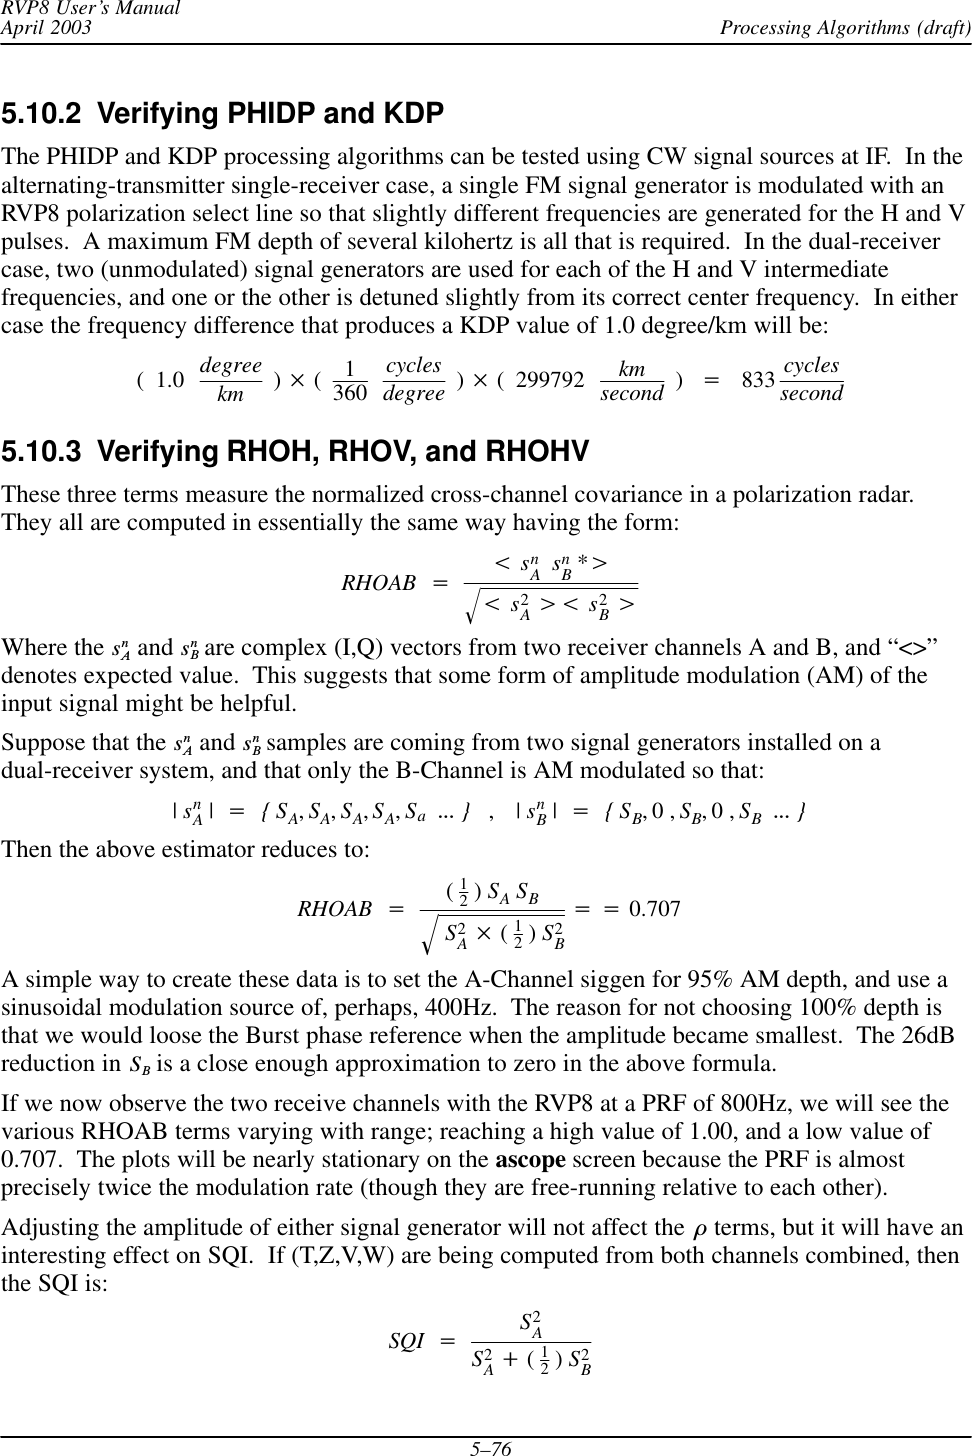 Processing Algorithms (draft)RVP8 User’s ManualApril 20035–765.10.2  Verifying PHIDP and KDPThe PHIDP and KDP processing algorithms can be tested using CW signal sources at IF.  In thealternating-transmitter single-receiver case, a single FM signal generator is modulated with anRVP8 polarization select line so that slightly different frequencies are generated for the H and Vpulses.  A maximum FM depth of several kilohertz is all that is required.  In the dual-receivercase, two (unmodulated) signal generators are used for each of the H and V intermediatefrequencies, and one or the other is detuned slightly from its correct center frequency.  In eithercase the frequency difference that produces a KDP value of 1.0 degree/km will be:(1.0 degreekm ) (1360cyclesdegree ) ( 299792 kmsecond )+833 cyclessecond5.10.3  Verifying RHOH, RHOV, and RHOHVThese three terms measure the normalized cross-channel covariance in a polarization radar.They all are computed in essentially the same way having the form:RHOAB +tsnAsnB*uts2Aut s2BuǸWhere the snA and snB are complex (I,Q) vectors from two receiver channels A and B, and “&lt;&gt;”denotes expected value.  This suggests that some form of amplitude modulation (AM) of theinput signal might be helpful.Suppose that the snA and snB samples are coming from two signal generators installed on adual-receiver system, and that only the B-Channel is AM modulated so that:|snA|+{SA,SA,SA,SA,SaAAA },|snB|+{SB,0,SB,0,SBAAA }Then the above estimator reduces to:RHOAB +(12)SASBS2A (12)S2BǸ++0.707A simple way to create these data is to set the A-Channel siggen for 95% AM depth, and use asinusoidal modulation source of, perhaps, 400Hz.  The reason for not choosing 100% depth isthat we would loose the Burst phase reference when the amplitude became smallest.  The 26dBreduction in SB is a close enough approximation to zero in the above formula.If we now observe the two receive channels with the RVP8 at a PRF of 800Hz, we will see thevarious RHOAB terms varying with range; reaching a high value of 1.00, and a low value of0.707.  The plots will be nearly stationary on the ascope screen because the PRF is almostprecisely twice the modulation rate (though they are free-running relative to each other).Adjusting the amplitude of either signal generator will not affect the ò terms, but it will have aninteresting effect on SQI.  If (T,Z,V,W) are being computed from both channels combined, thenthe SQI is:SQI +S2AS2A)(12)S2B